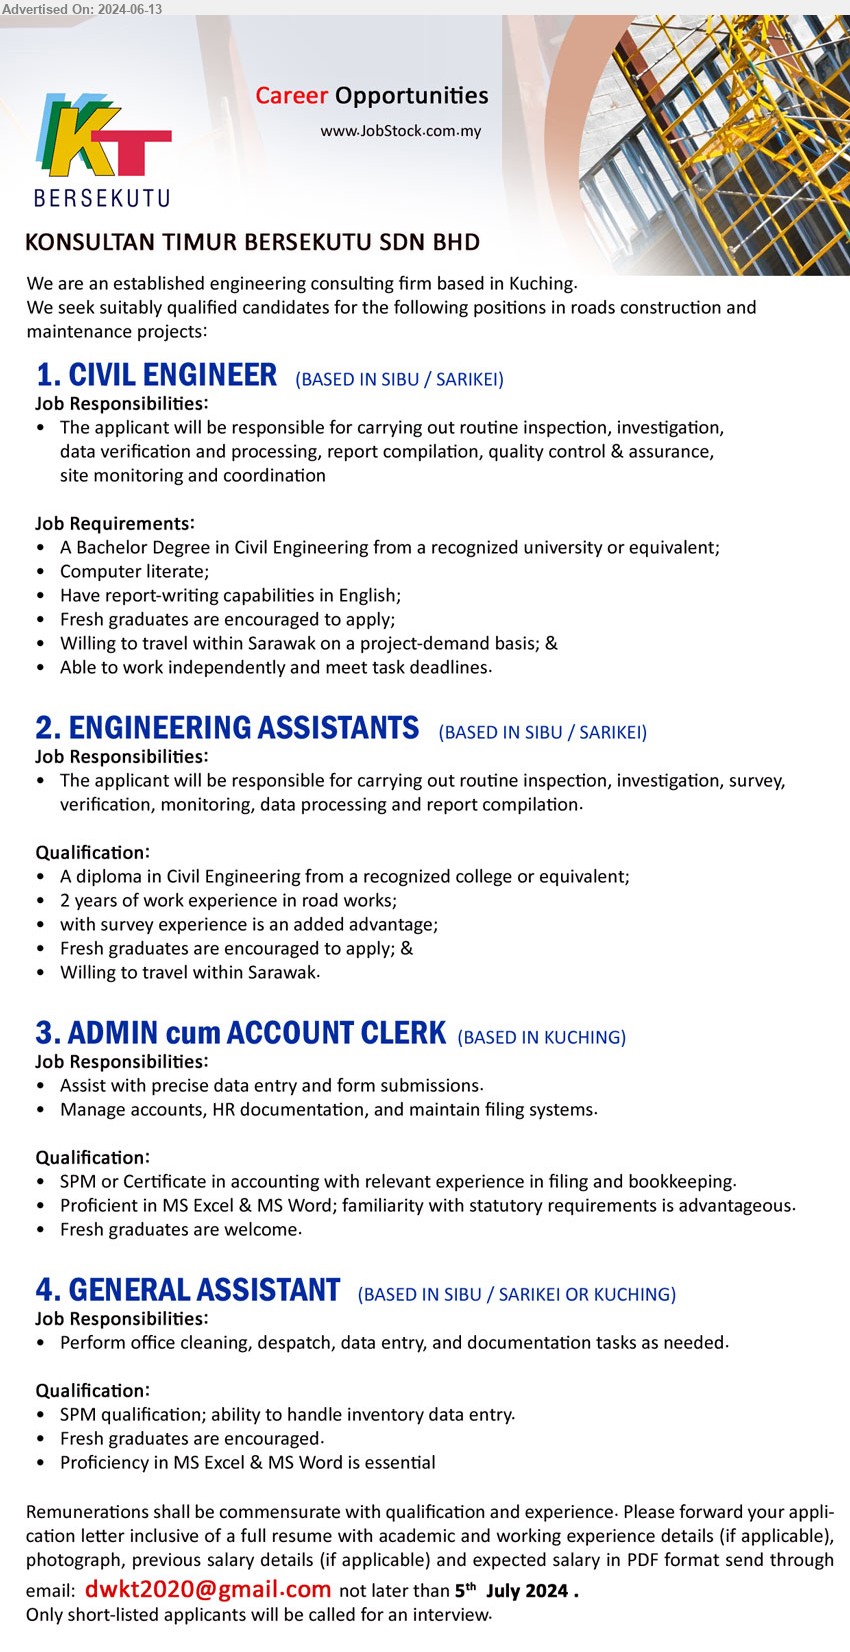 KONSULTAN TIMUR BERSEKUTU SDN BHD - 1. CIVIL ENGINEER (Sibu, Sarikei), A Bachelor Degree in Civil Engineering from a recognized university ,...
2. ENGINEERING ASSISTANTS (Sibu, Sarikei), A Diploma in Civil Engineering from a recognized college,...
3. ADMIN cum ACCOUNT CLERK (Kuching), SPM or Certificate in Accounting with relevant experience in filing and bookkeeping.,...
4. GENERAL ASSISTANT (Kuching, Sibu, Sarikei), SPM qualification; ability to handle inventory data entry.,...
Email resume to ...